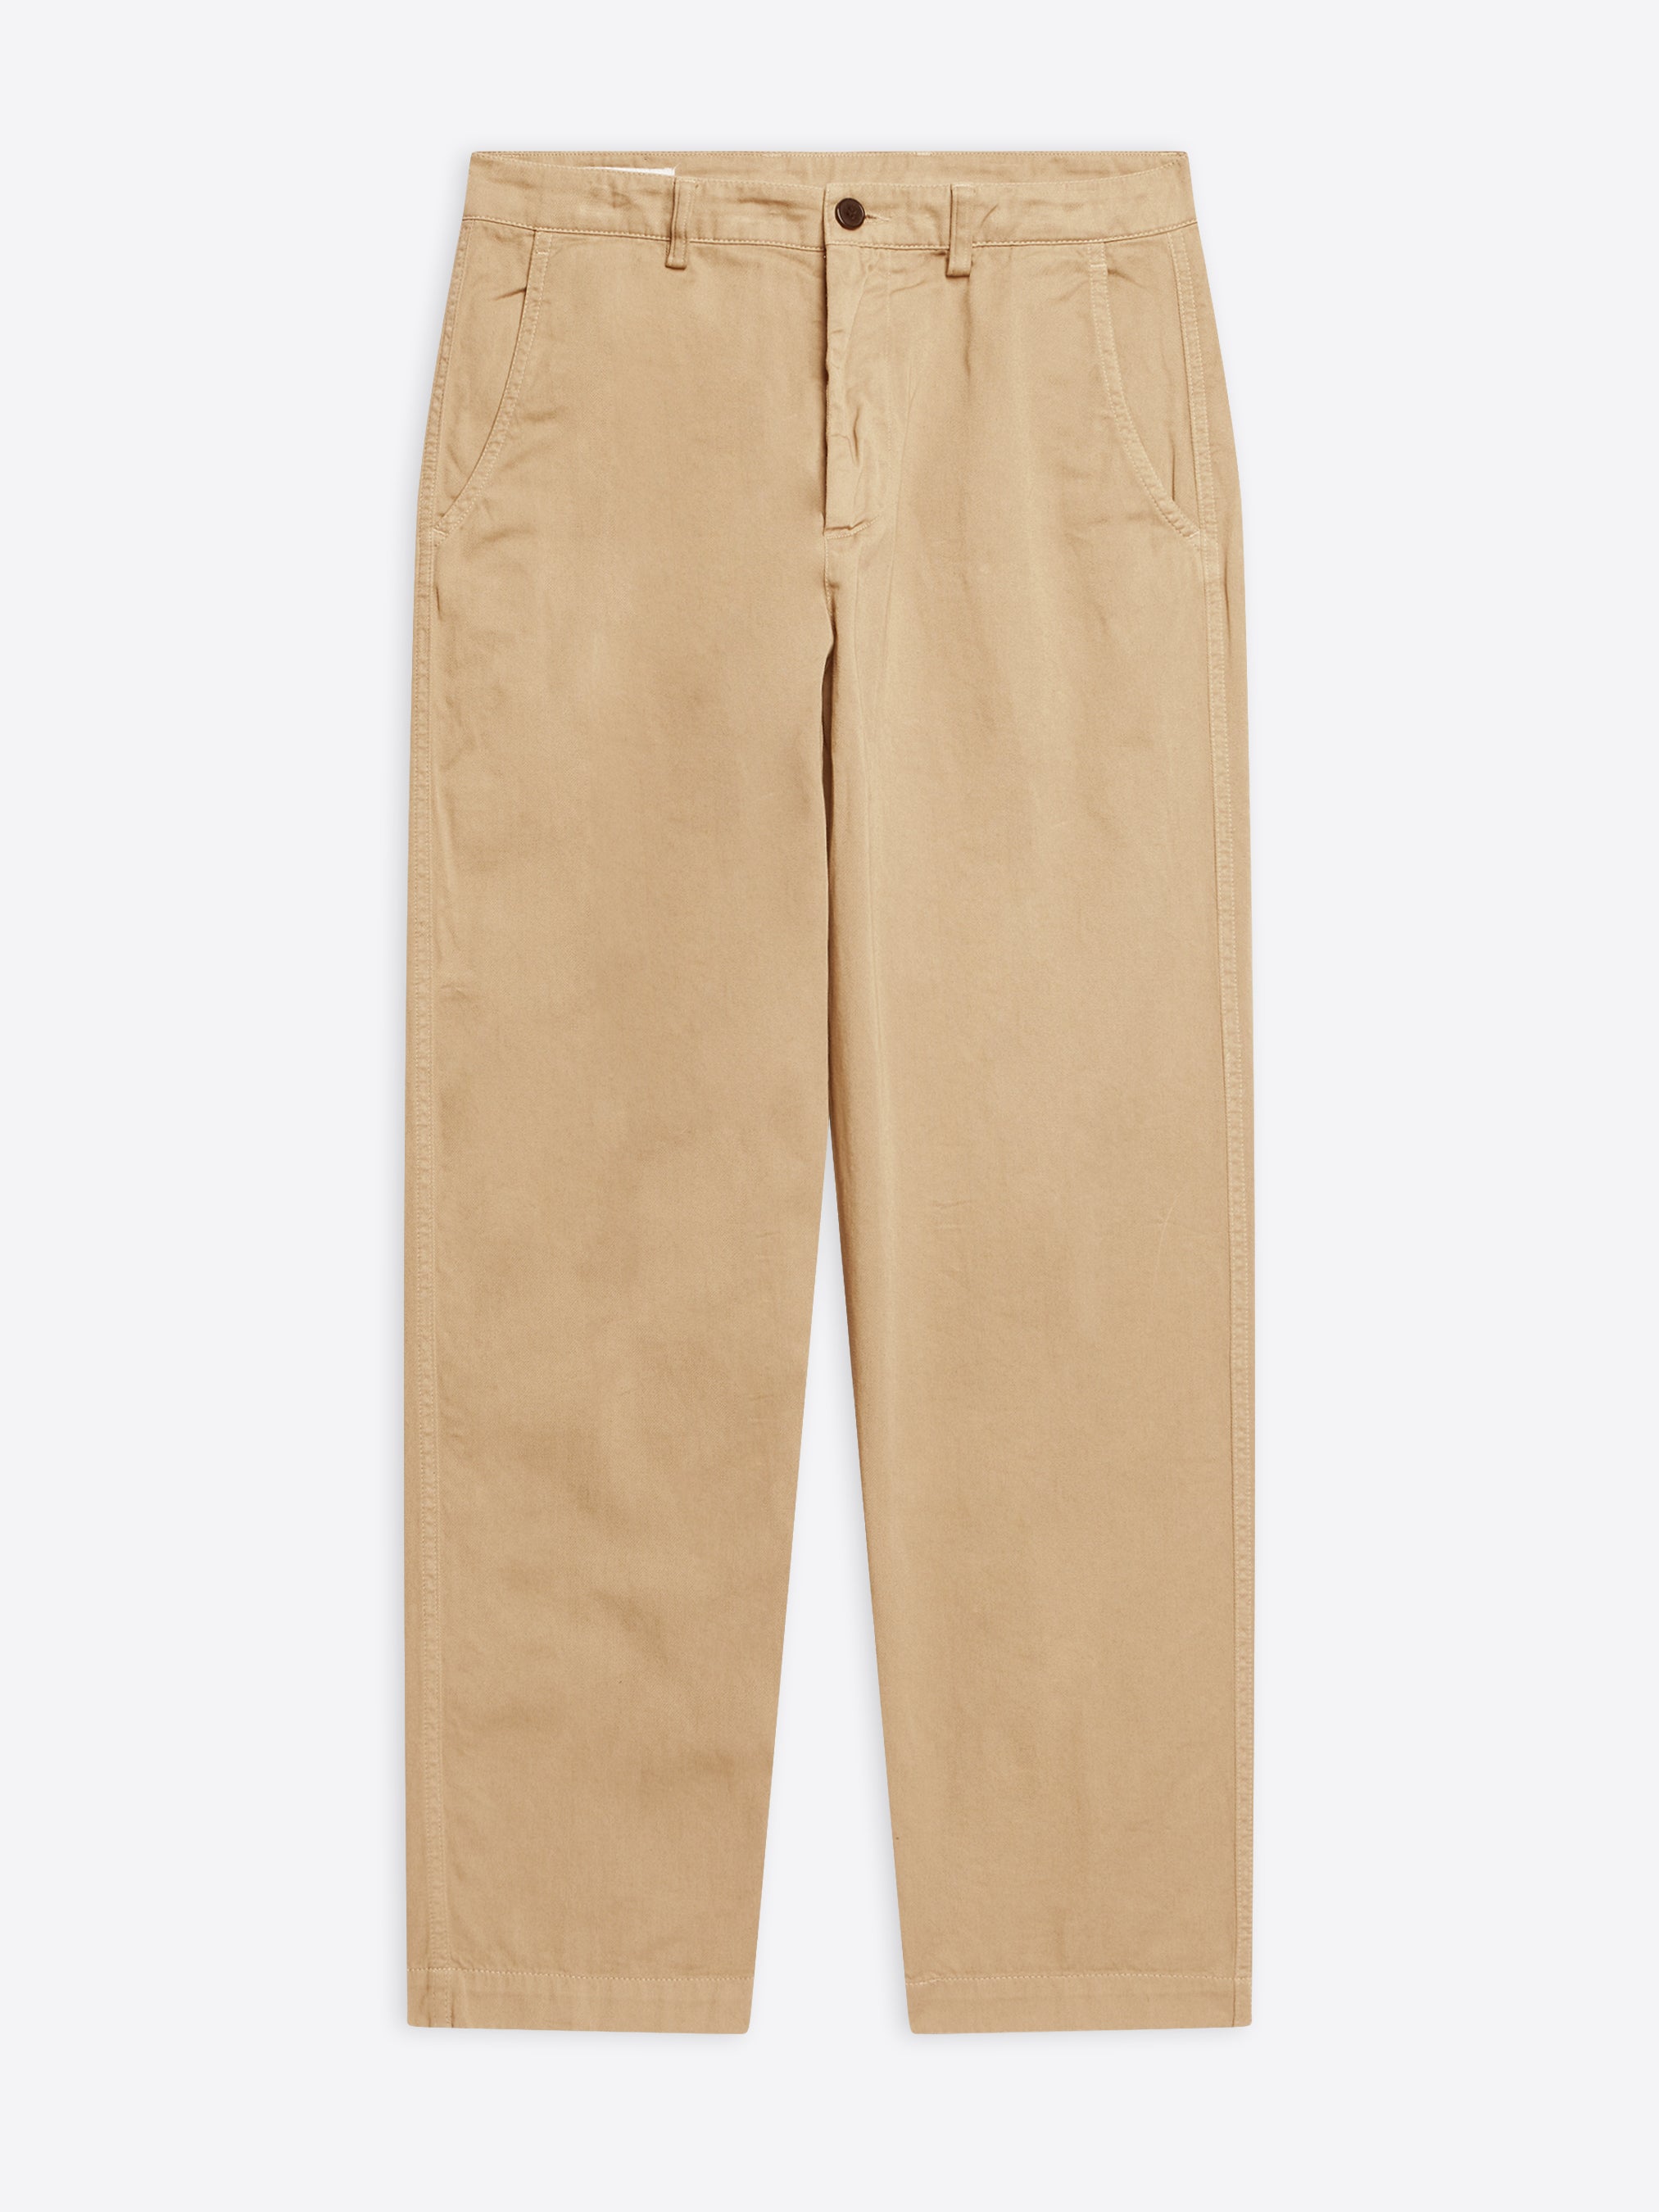 J.Crew: Pleated Cropped Stretch Chino Pant For Men